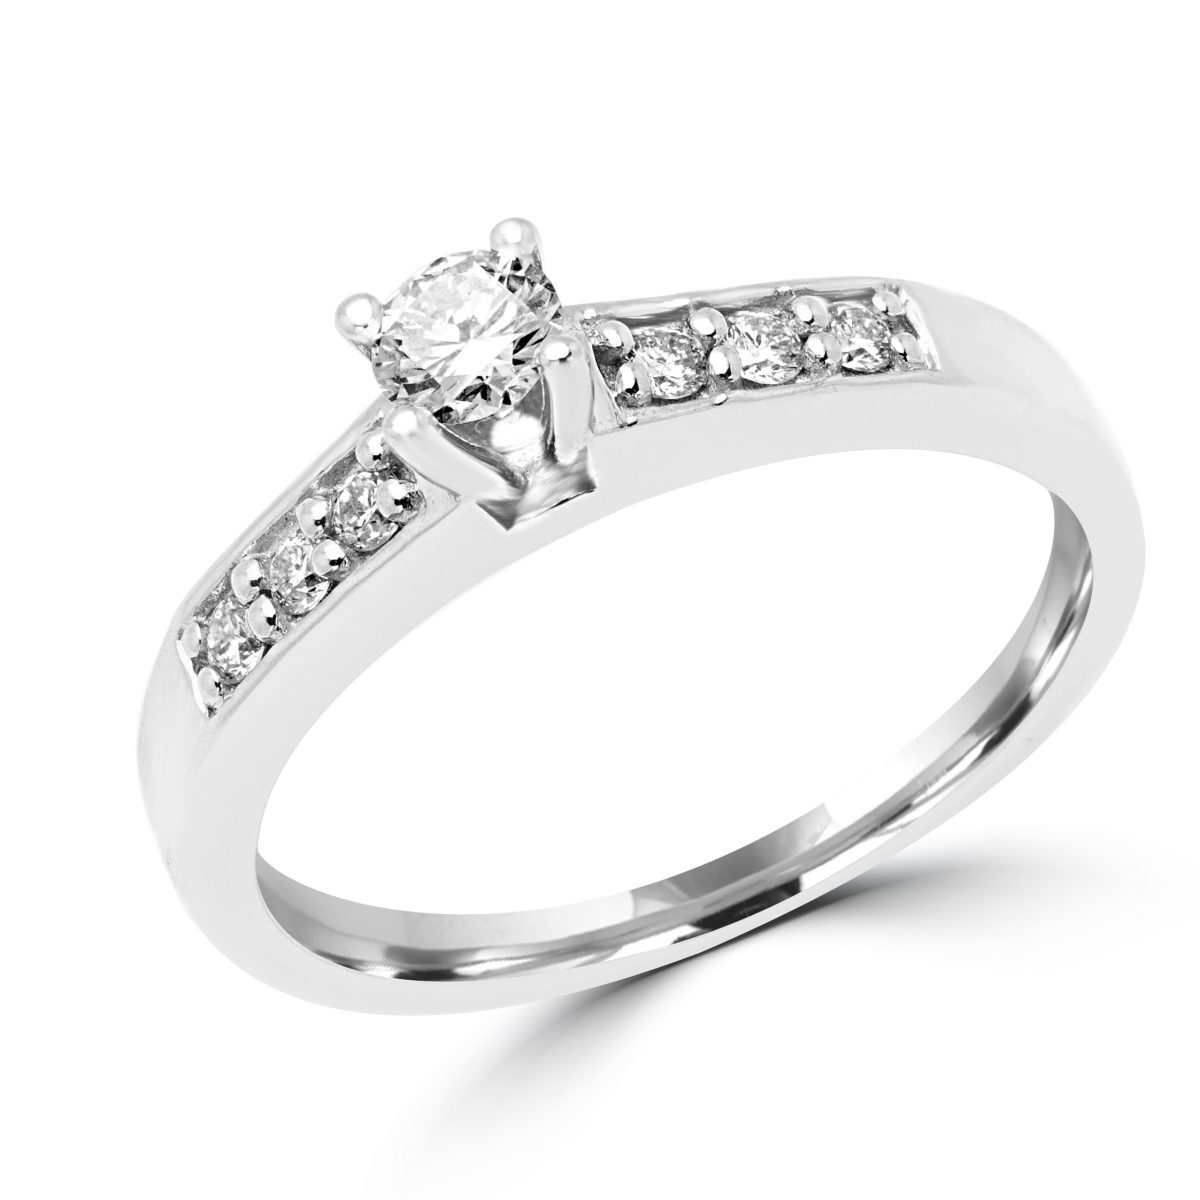 Shinning solitaire engagement ring 0.36 (ctw) in 14k white gold